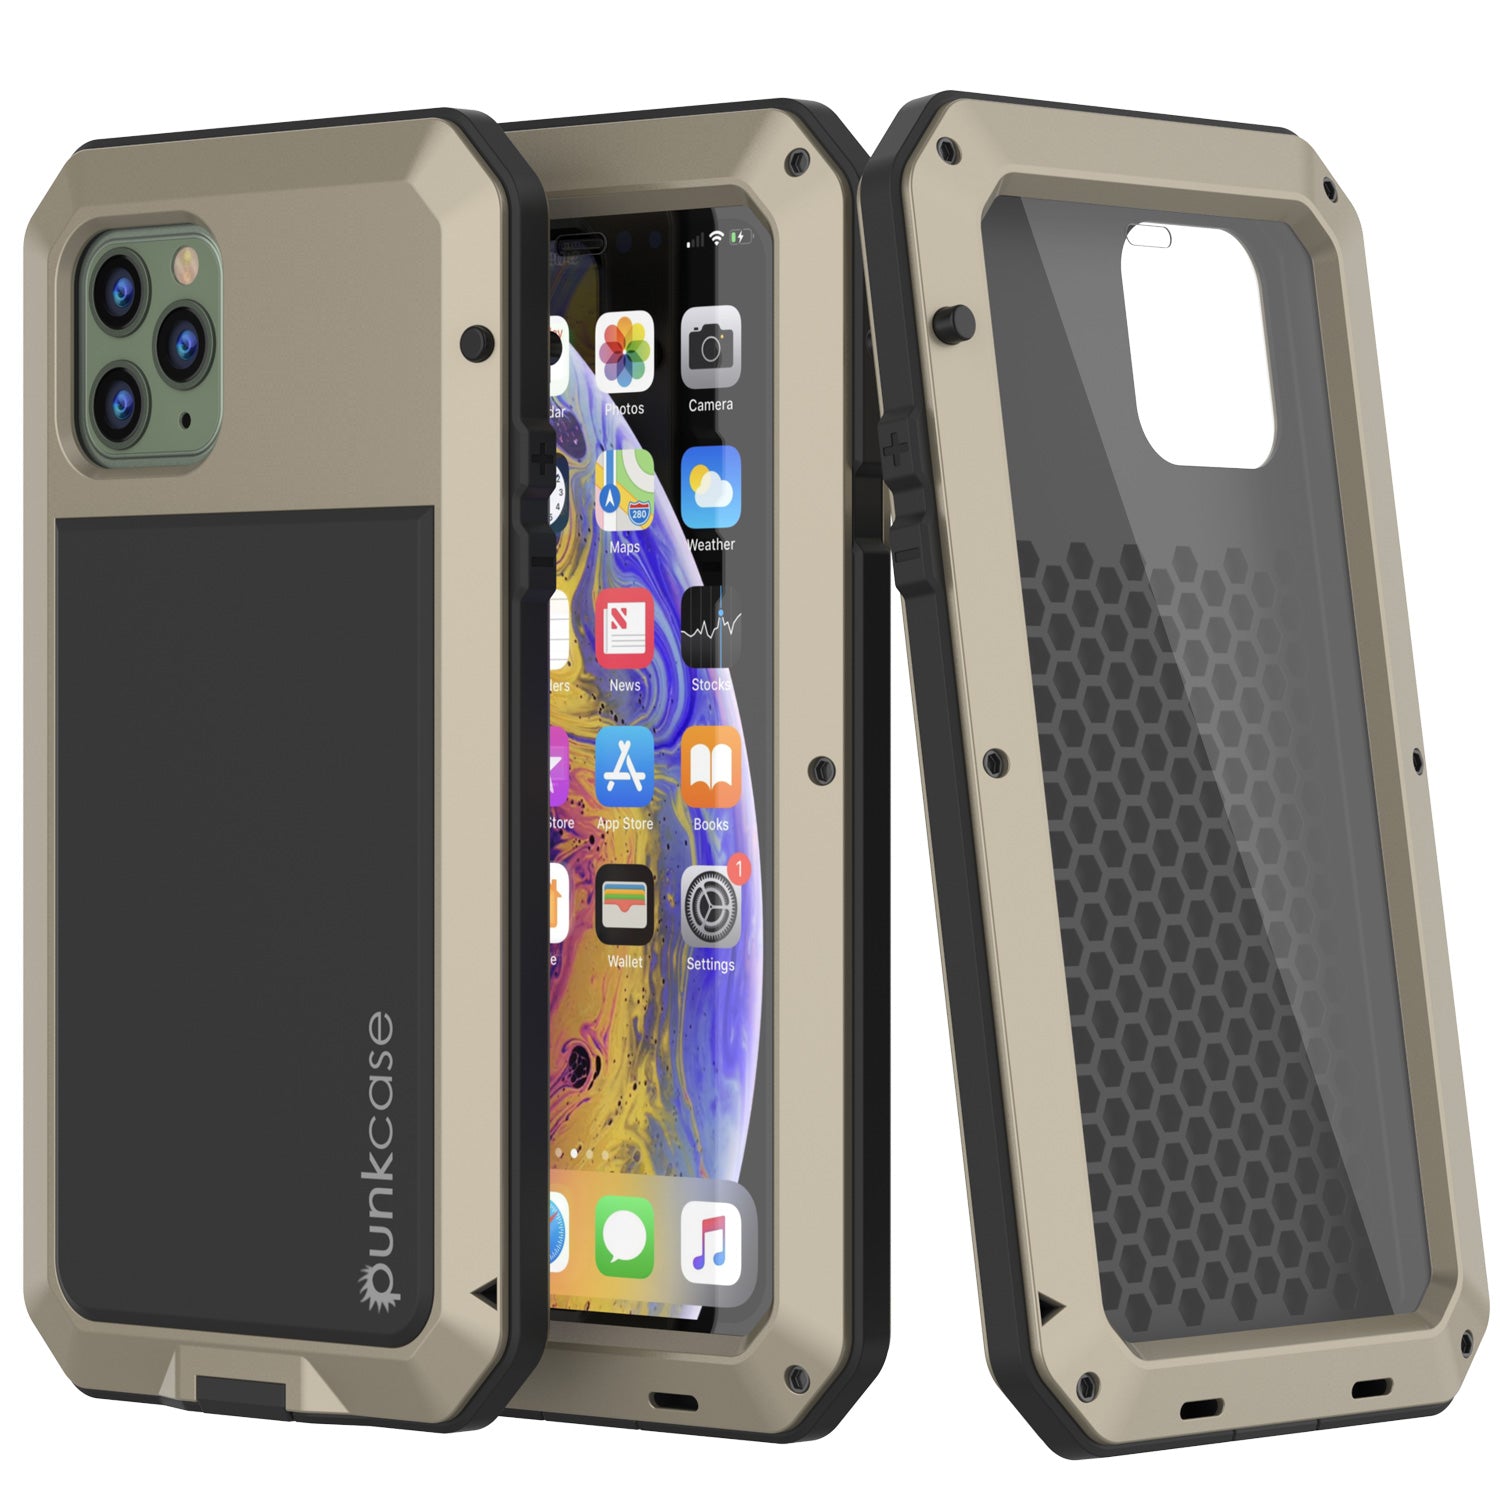 Punkcase iPhone 11 Pro Max Metal Case, Heavy Duty Military Grade Armor Cover [Shock Proof] Full Body Hard [Gold] - Gold